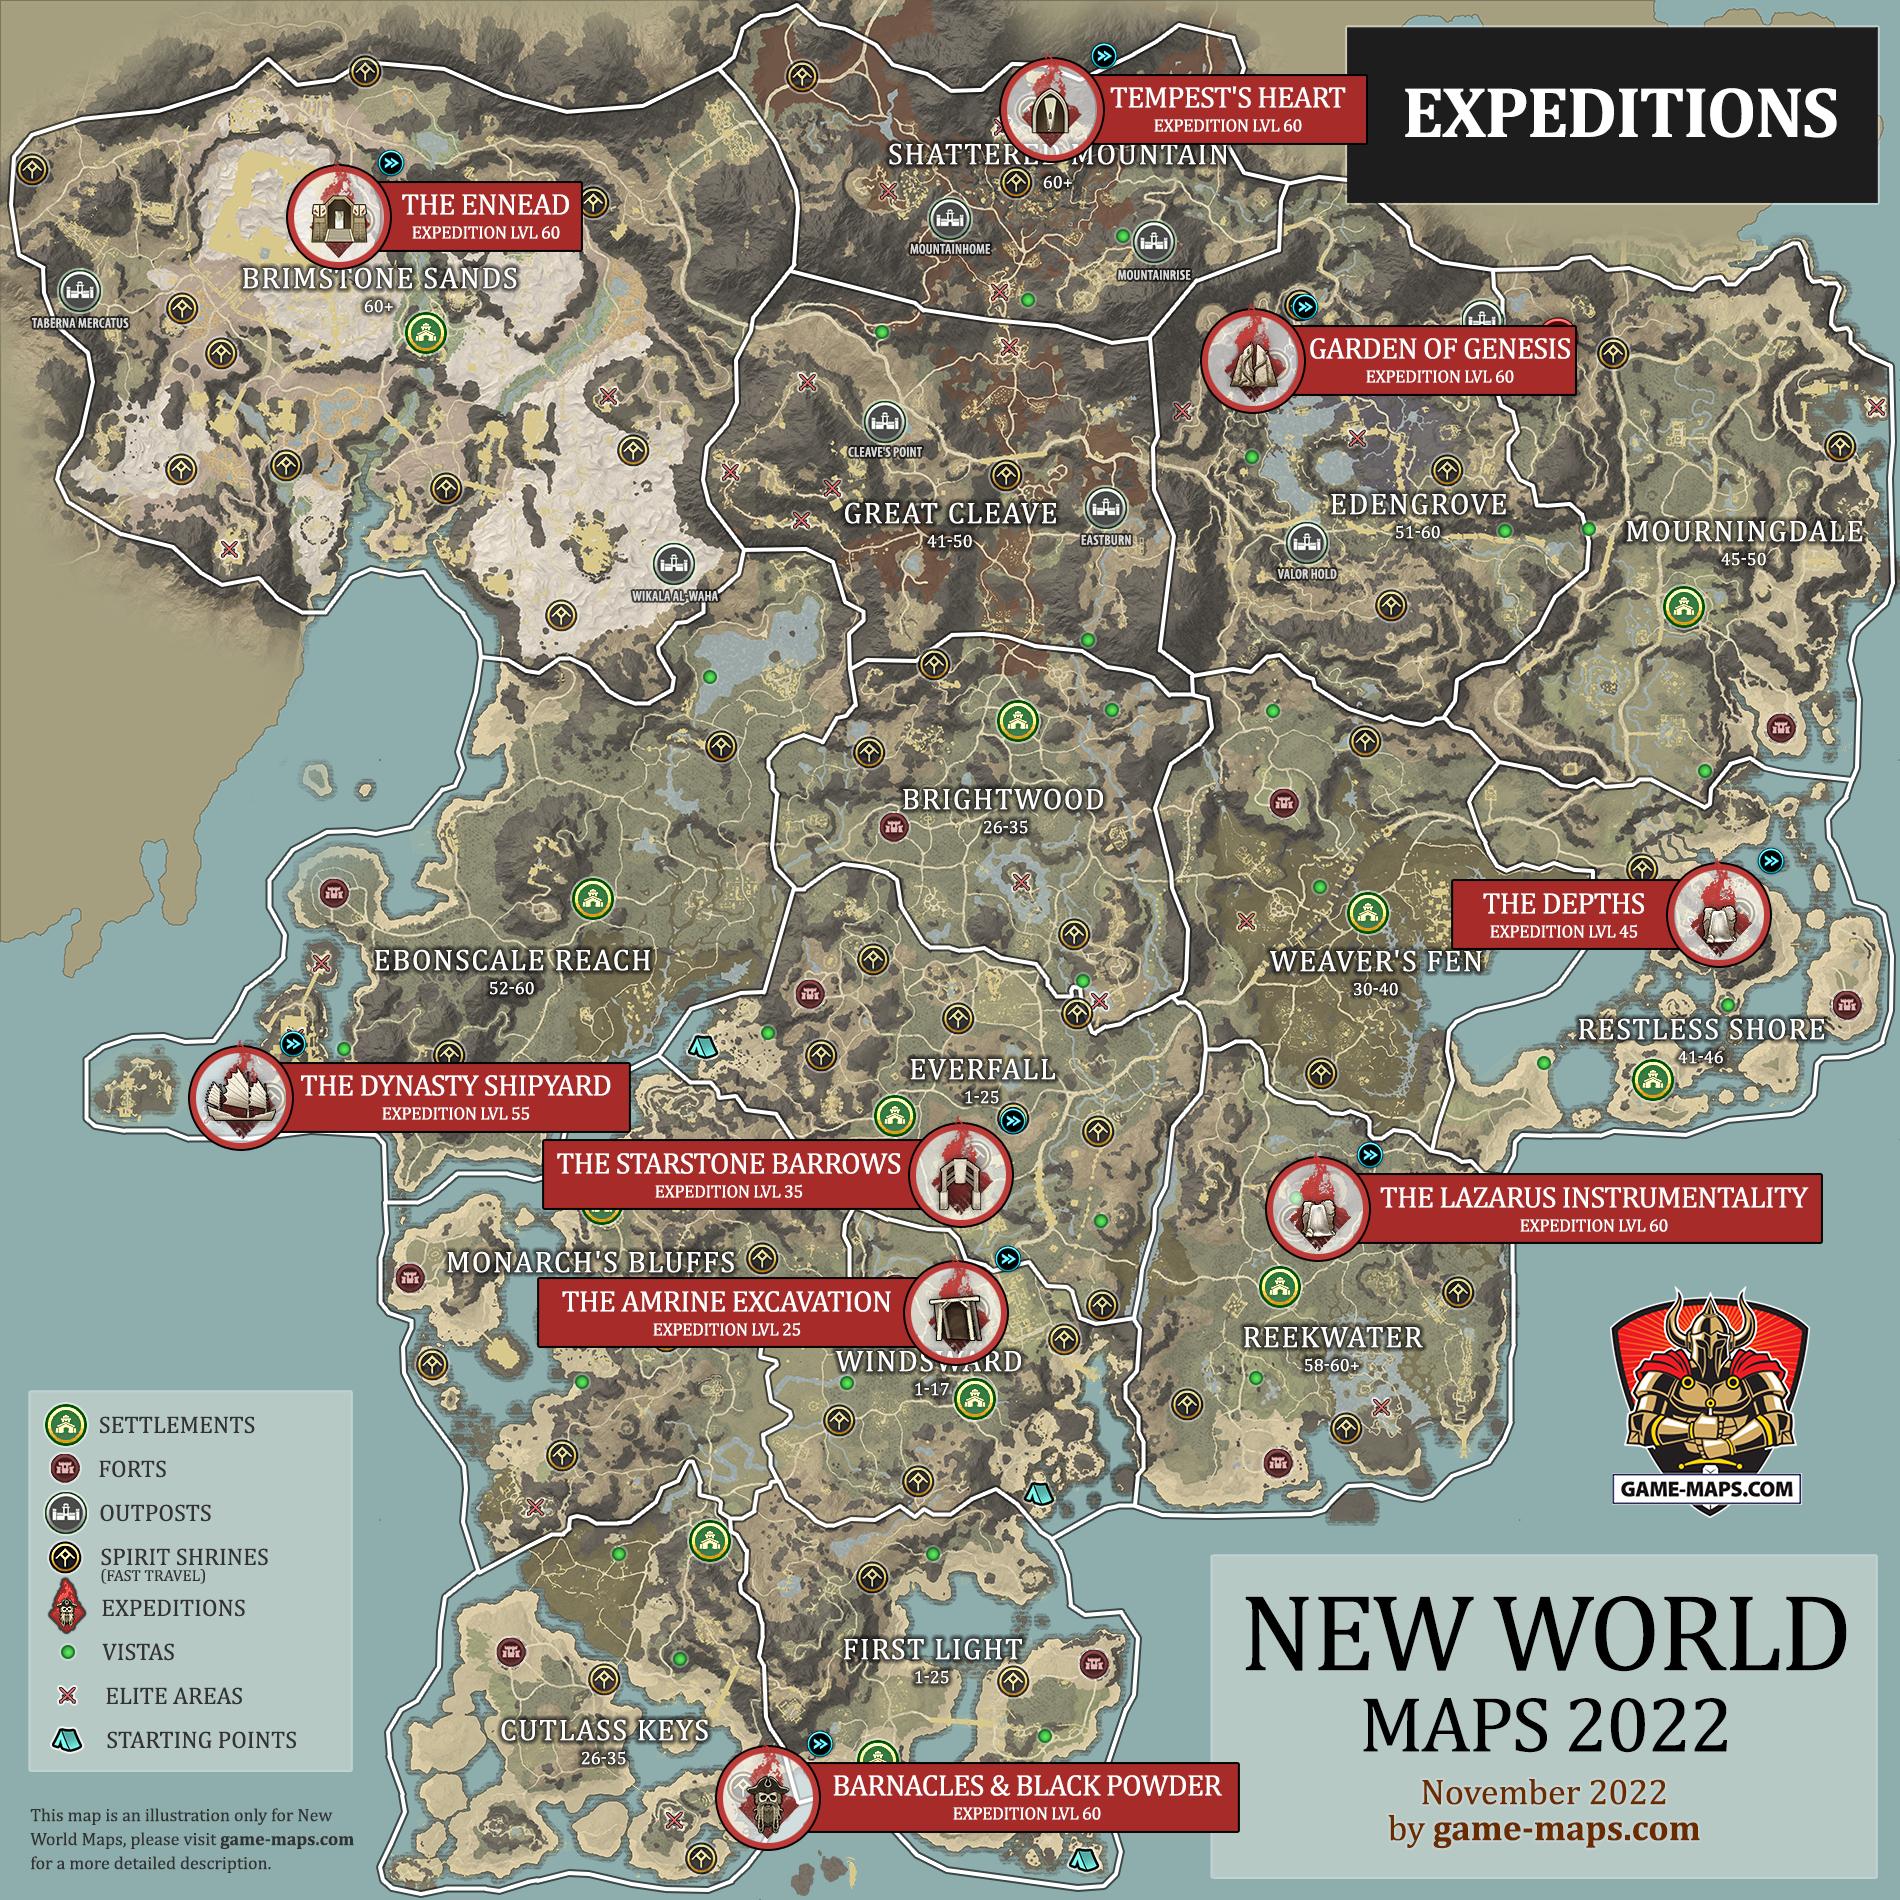 Expeditions Location Map for New World MMO